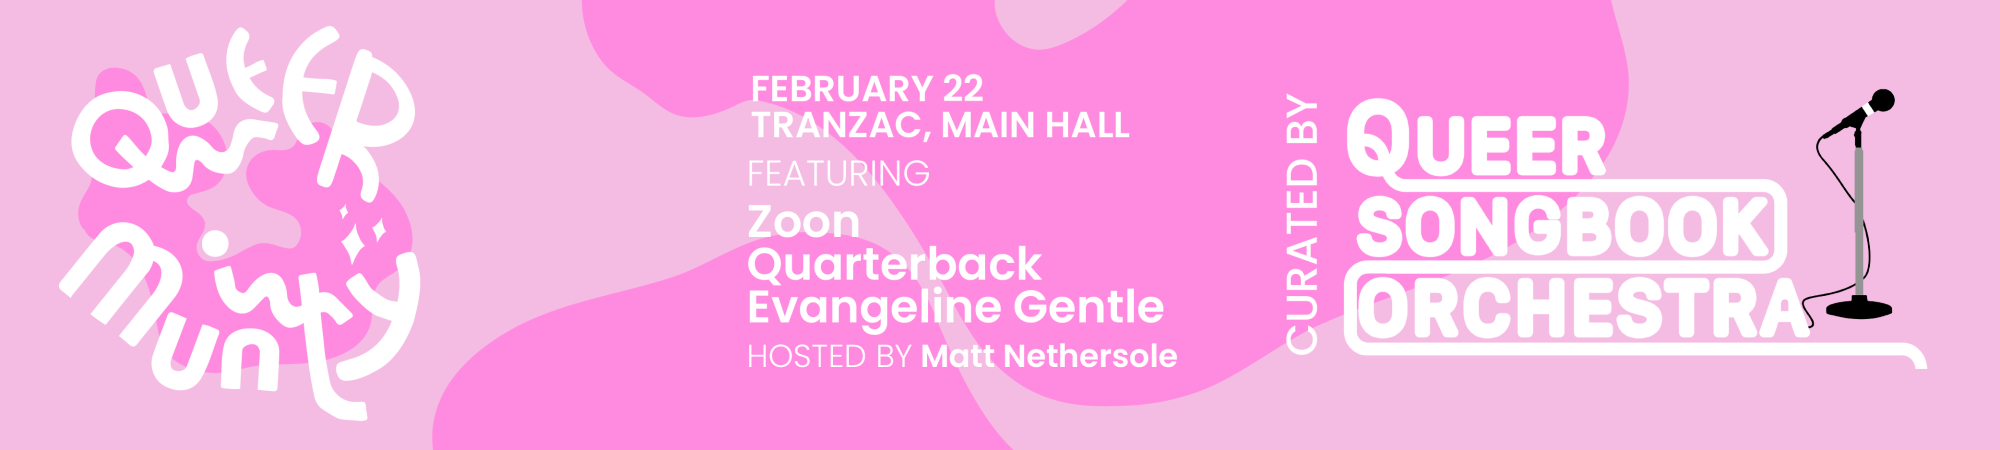 Queermunity, February 22 at the Tranzac Main Hall FEATURING Zoon Quarterback Evangeline Gentle HOSTED BY Matt Nethersole Curated by Queer Songbook Orchestra